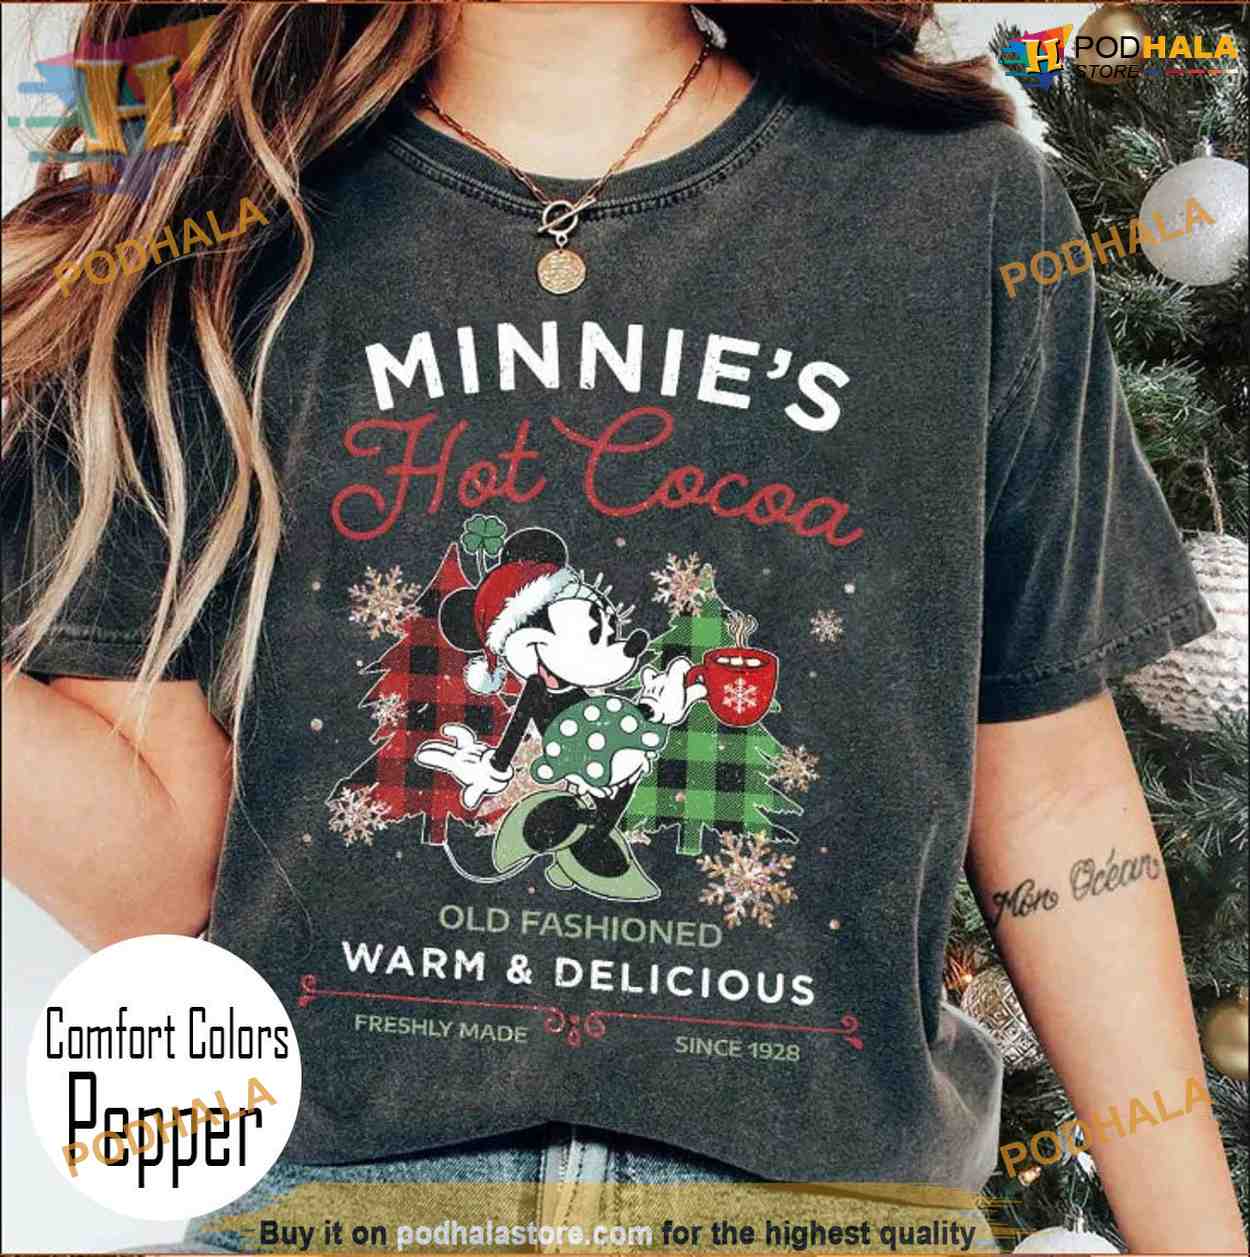 Comfort Colors Vintage Minnie's Festive Cocoa Delight Shirt, Funny Christmas Gift Ideas